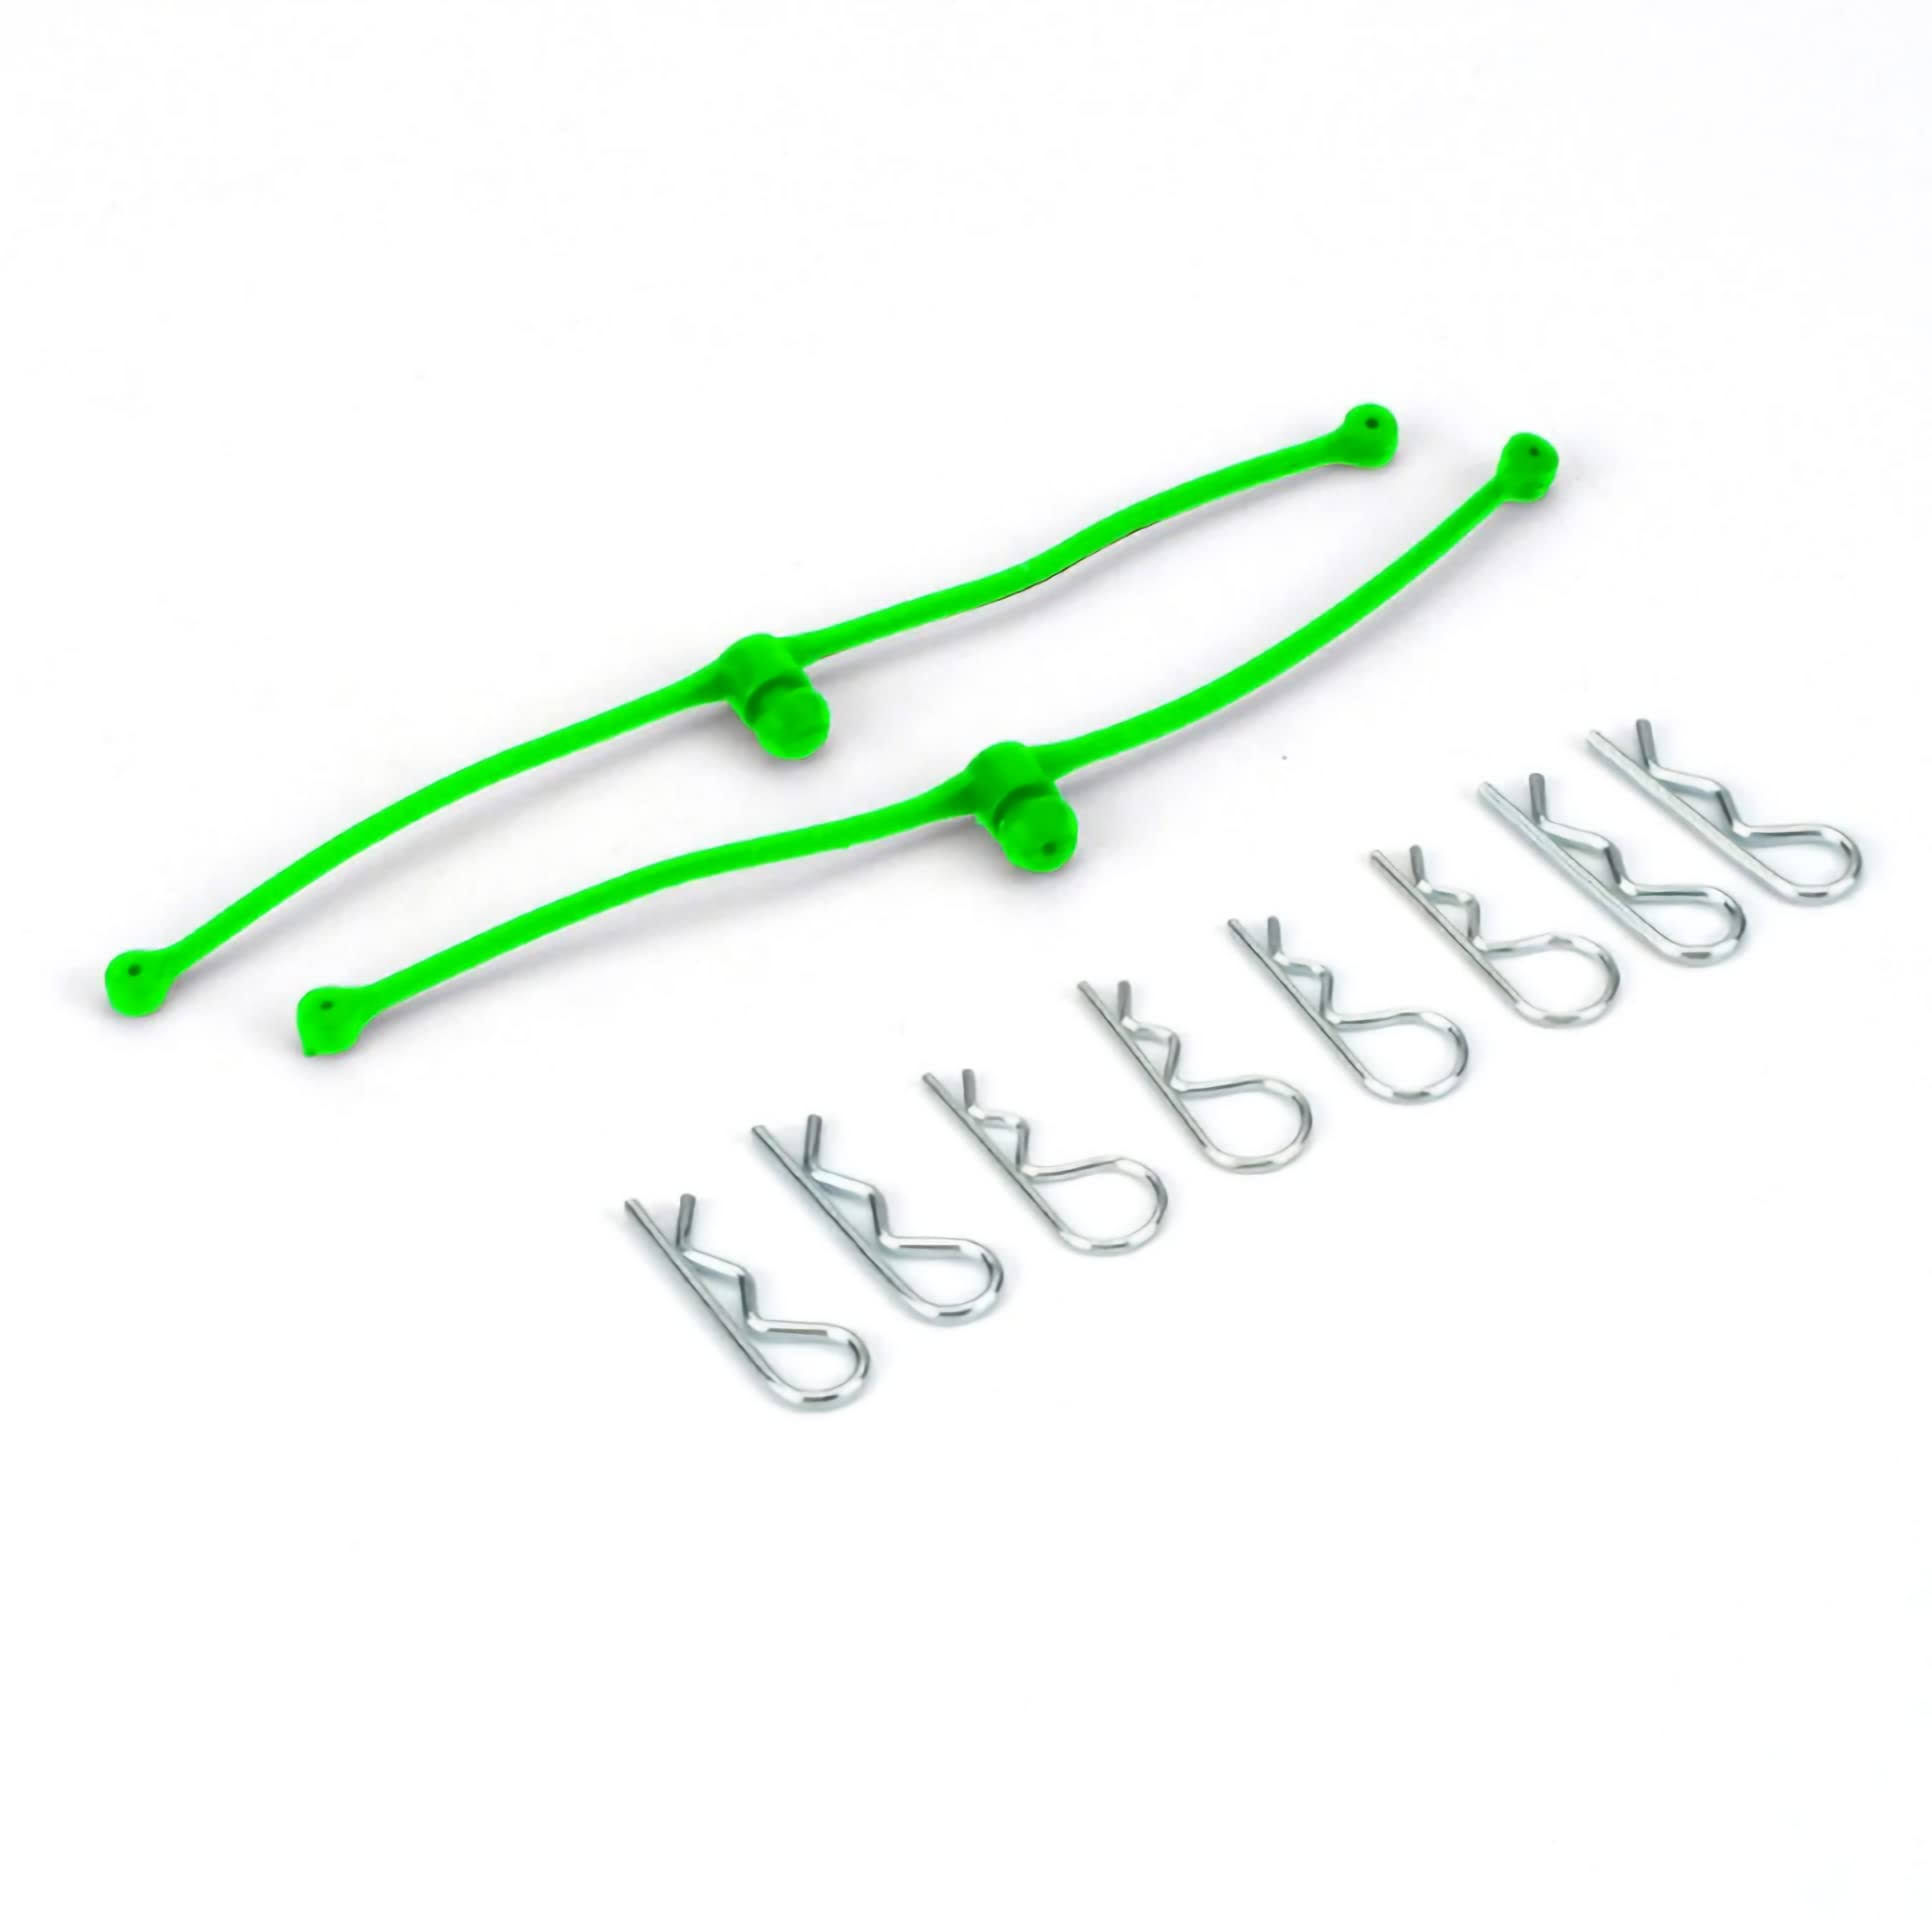 DuBro 2253 Body Klip Retainers - Lime Green, 2pcs